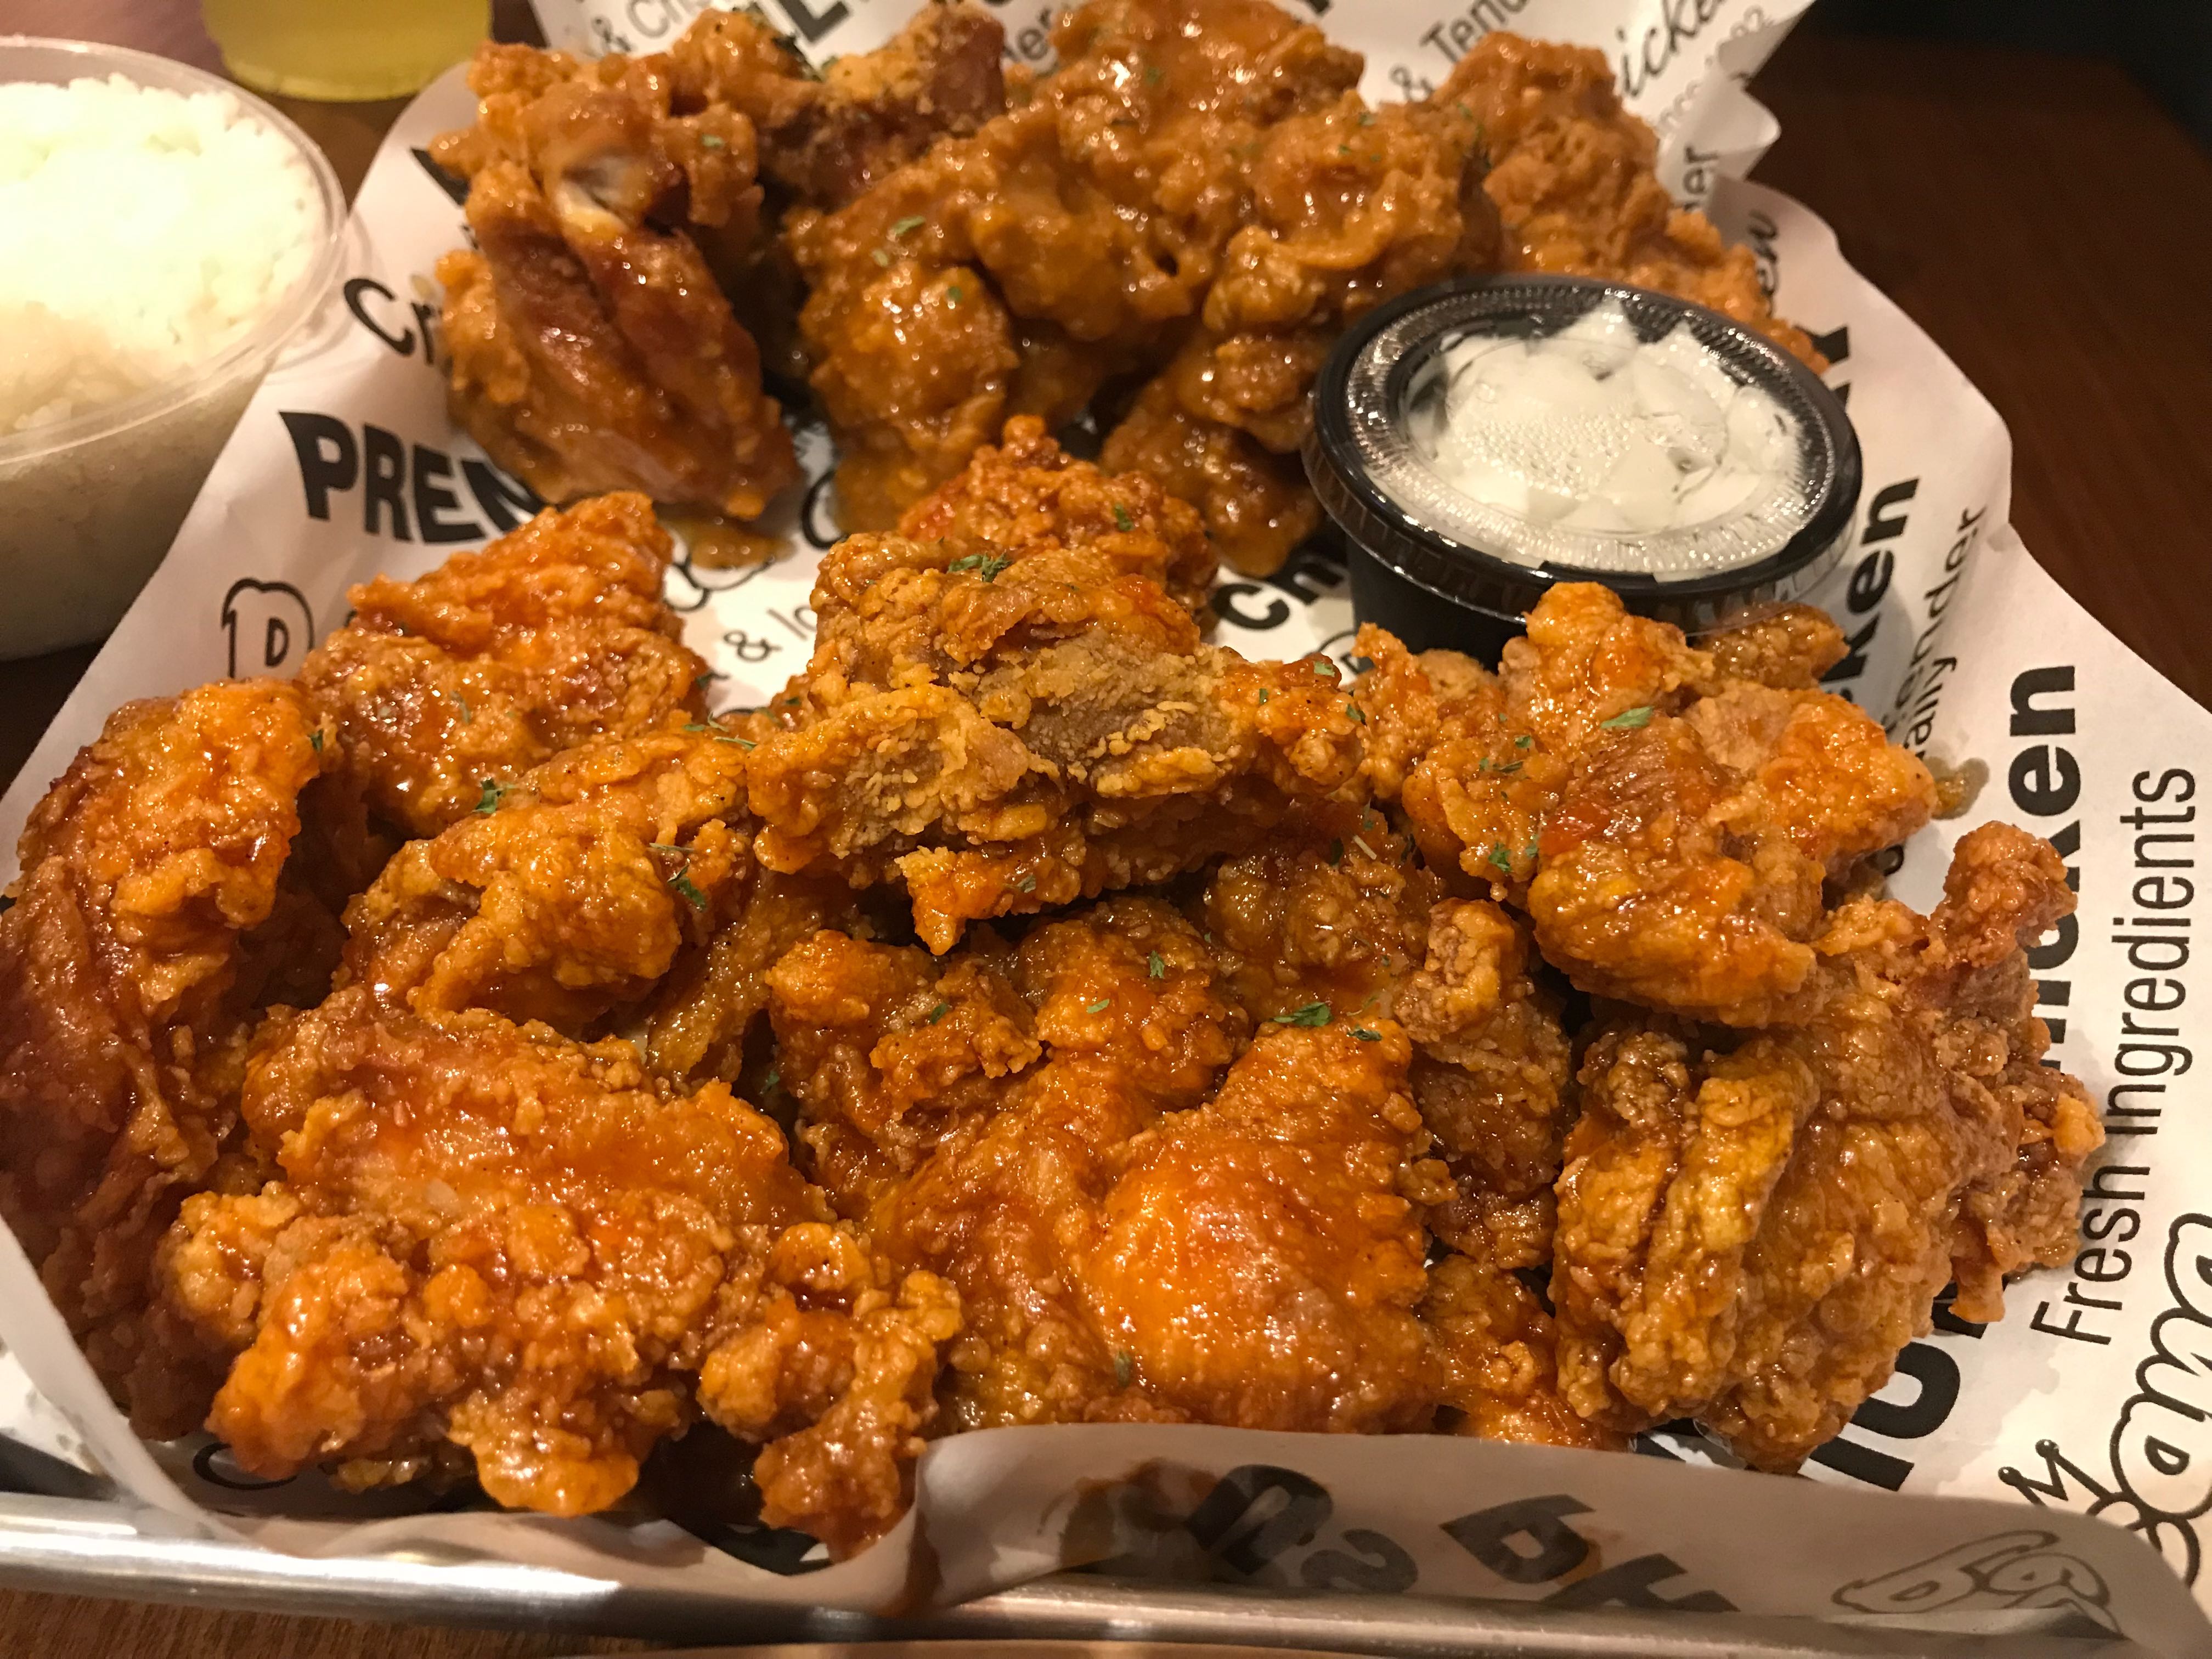 A plate of fried chicken wings with ramekin of white dipping sauce.